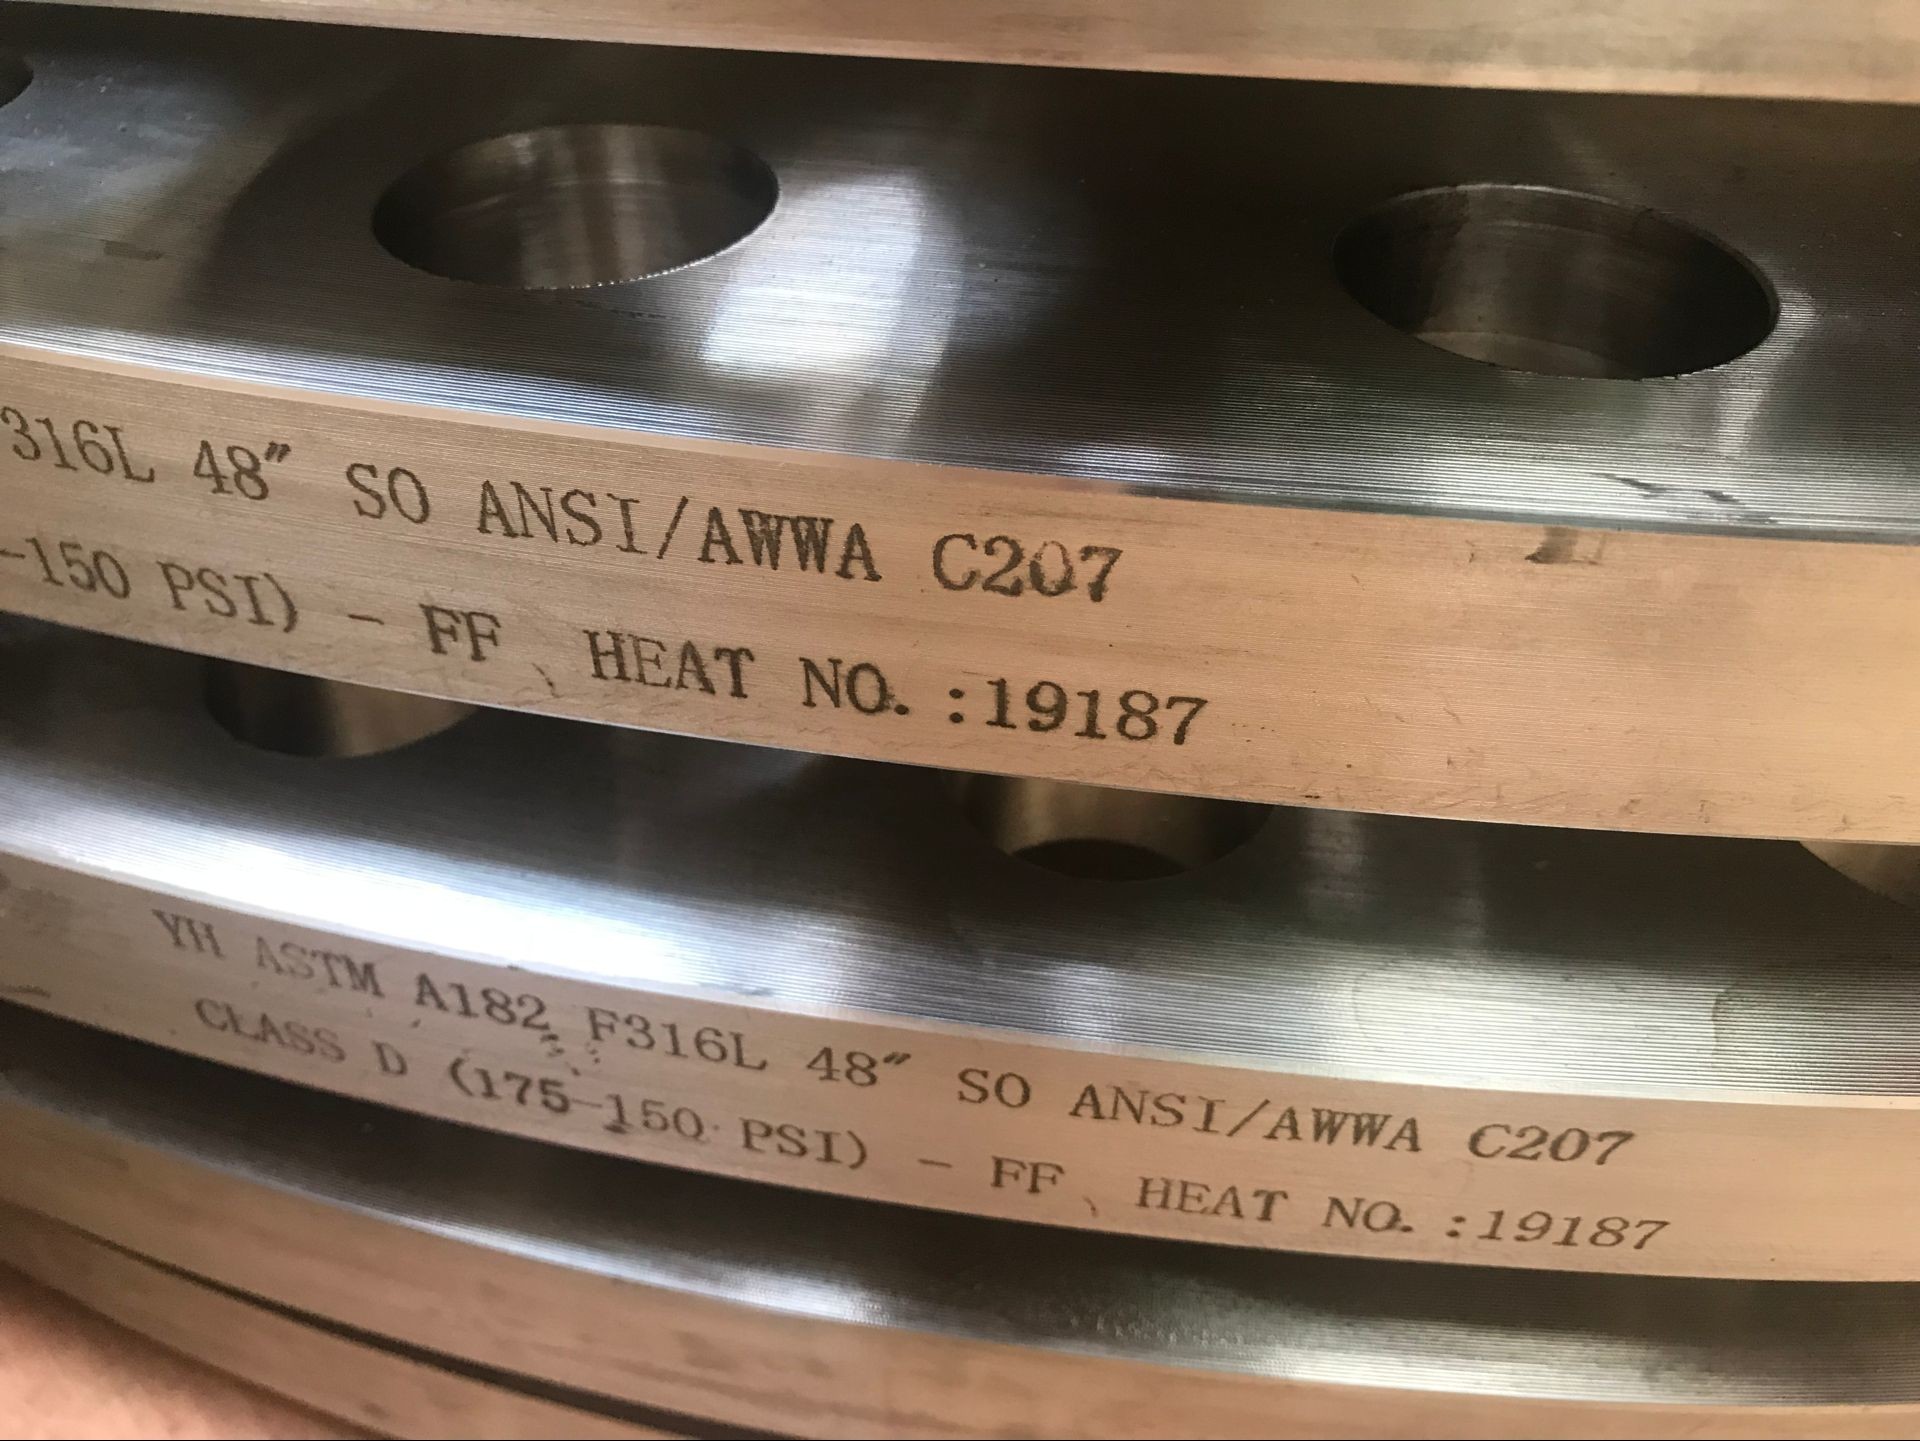 Soff Ansiawwa C207 Class D Flange Steel Flanges Asme Astm Bs 175 150 Psi86psi Steelseamlesspipe 9061